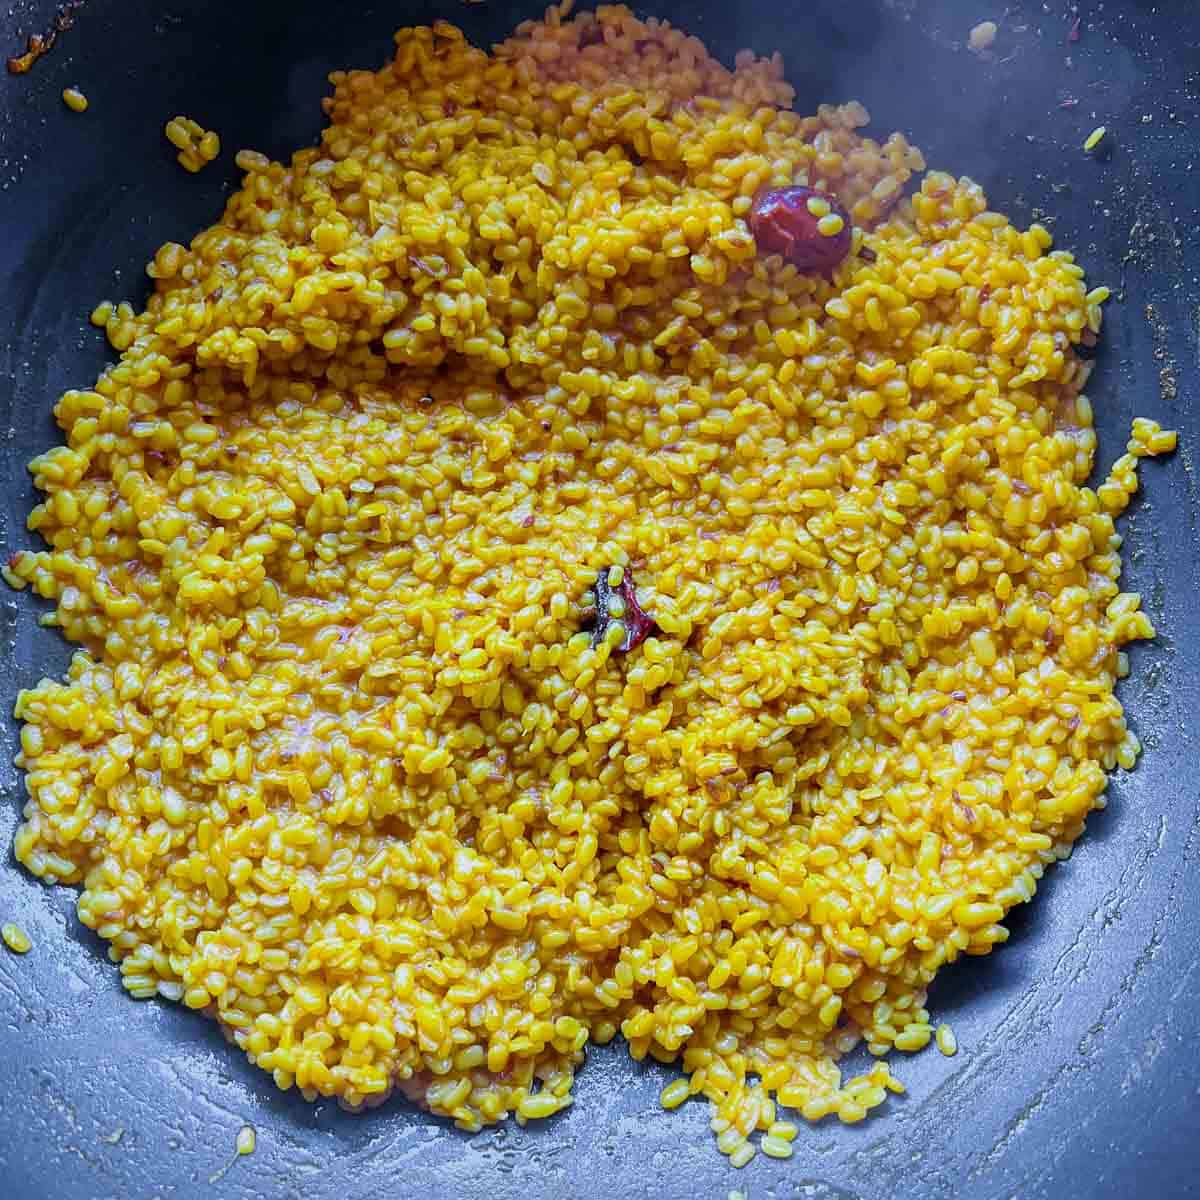 Tempering and yellow lentils in frying pan.